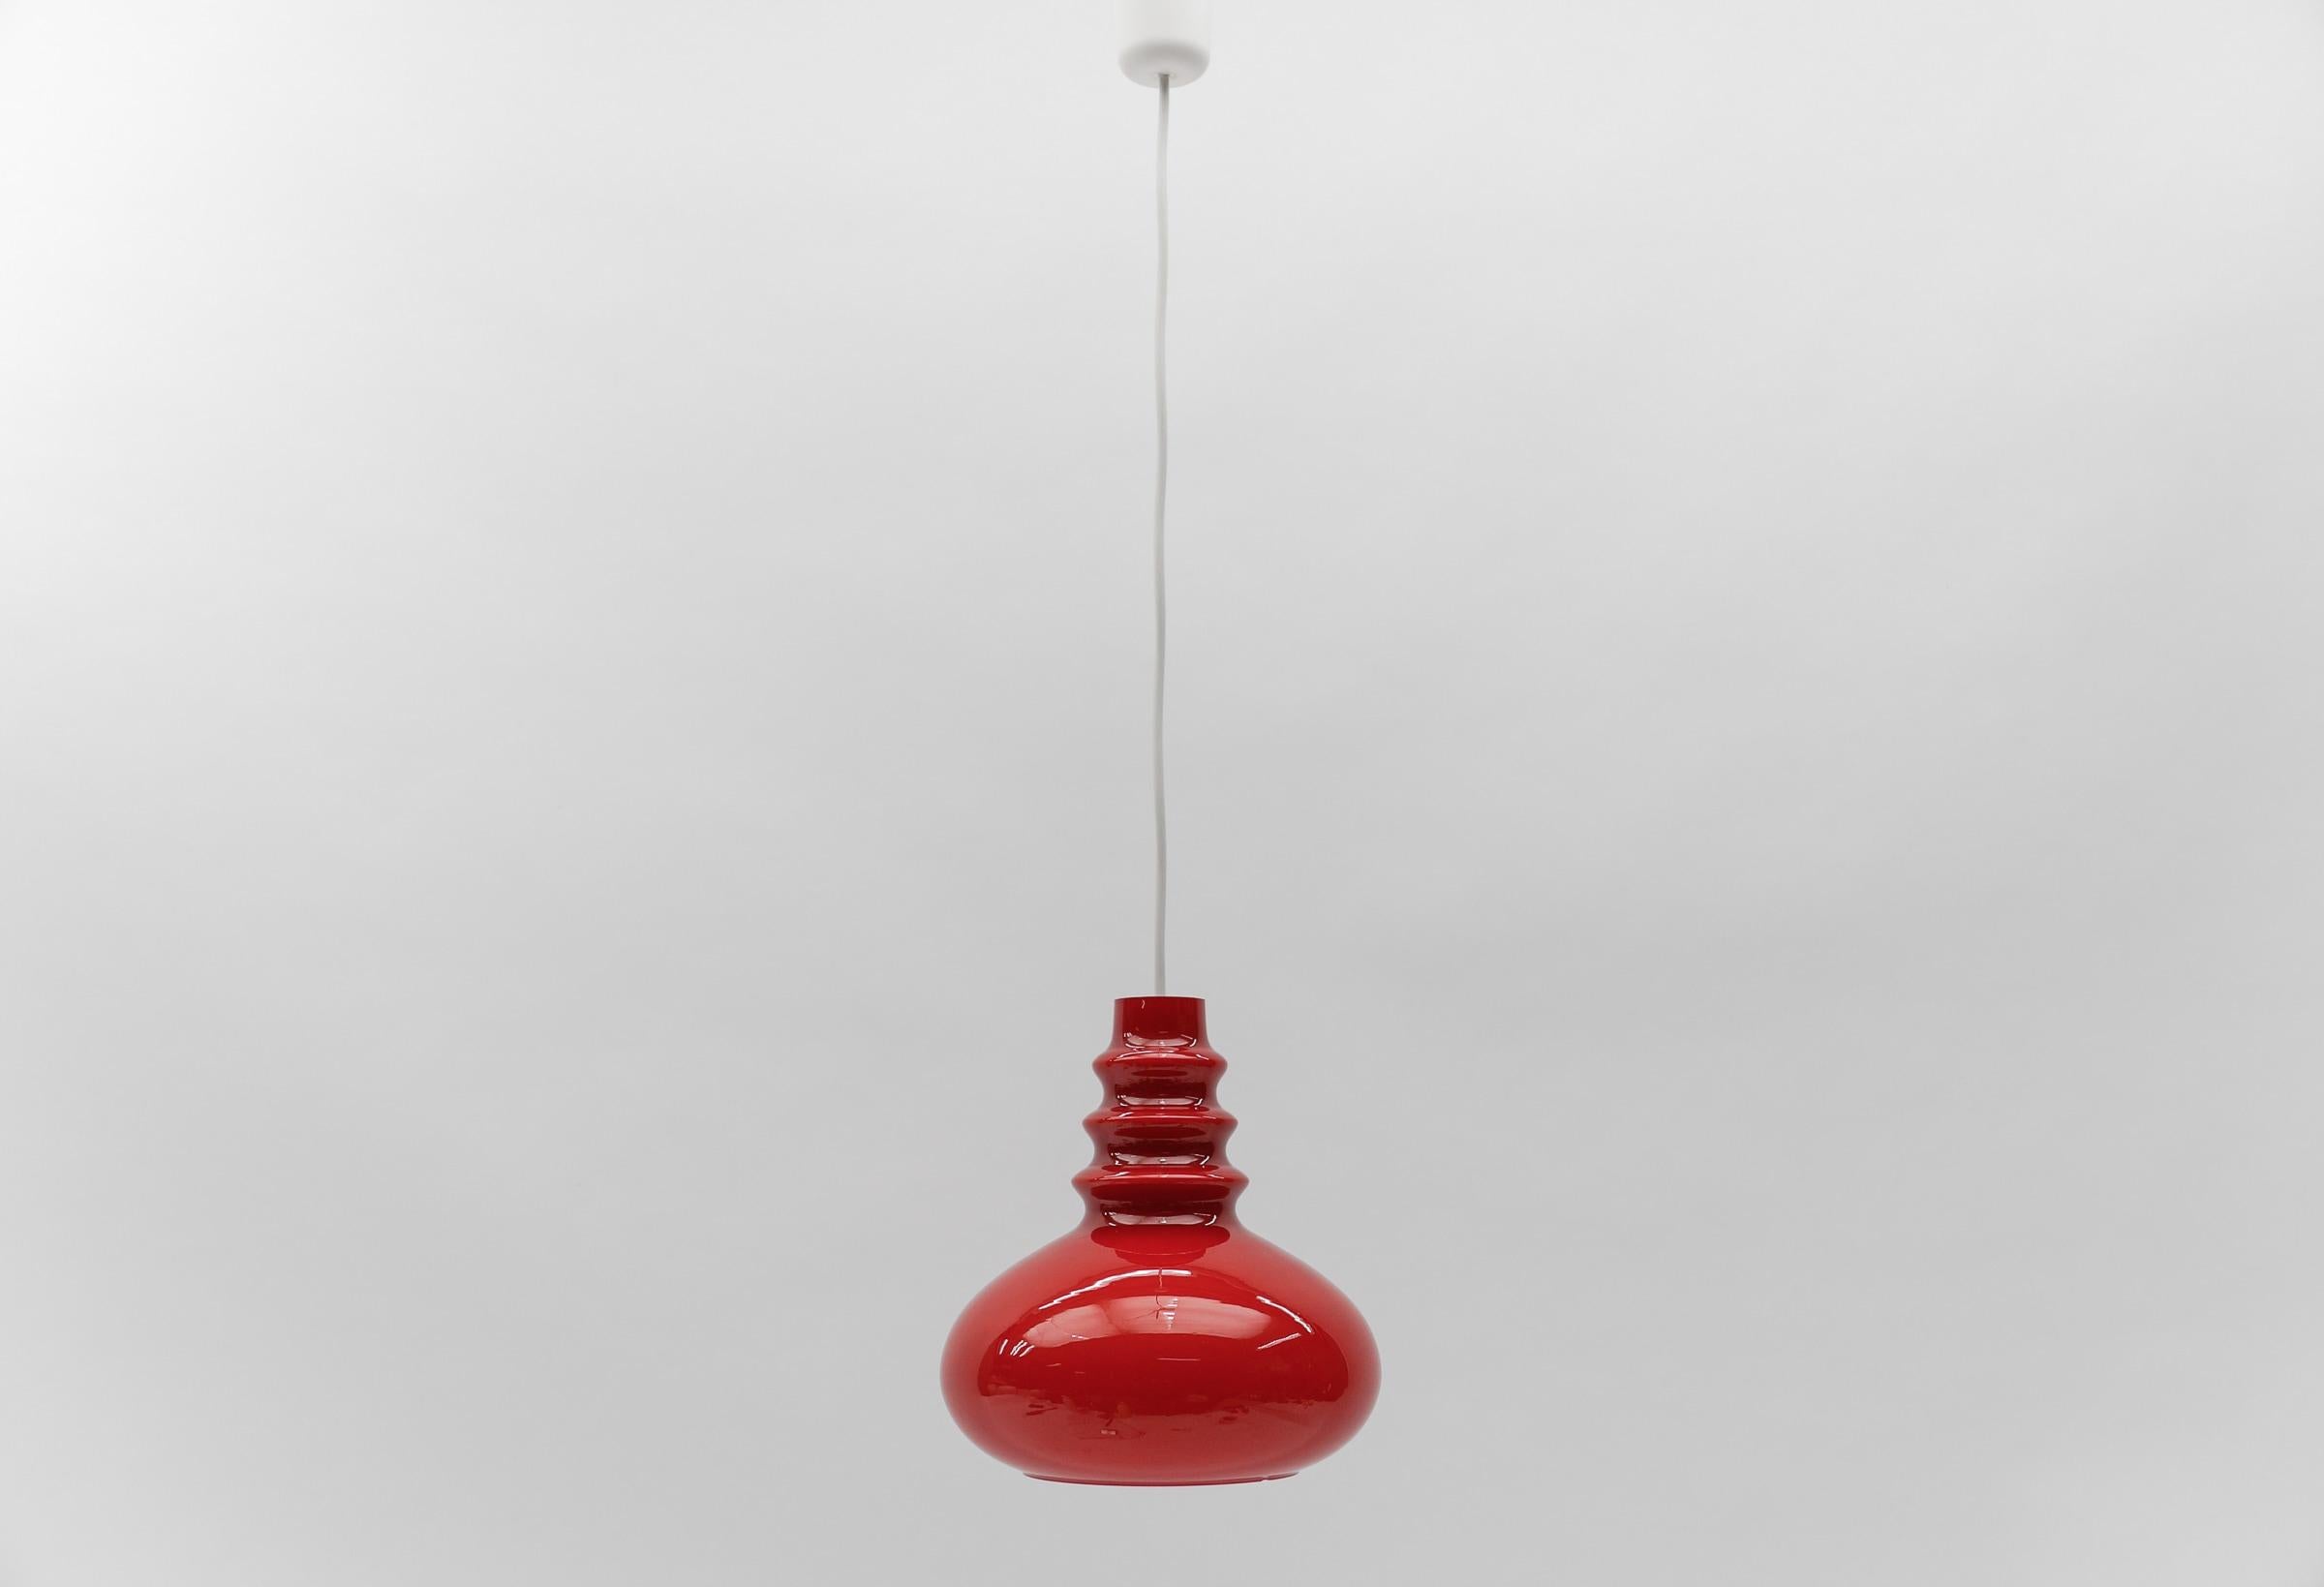 Lovely Lipstick Red Glass Ceiling Lamp by Peill & Putzler, 1960s

The lamp need 1x E27 / E26 Edison screw fit bulb, is wired, in working condition and runs both on 110 / 230 volt.

Light bulbs are not included.

It is possible to install this